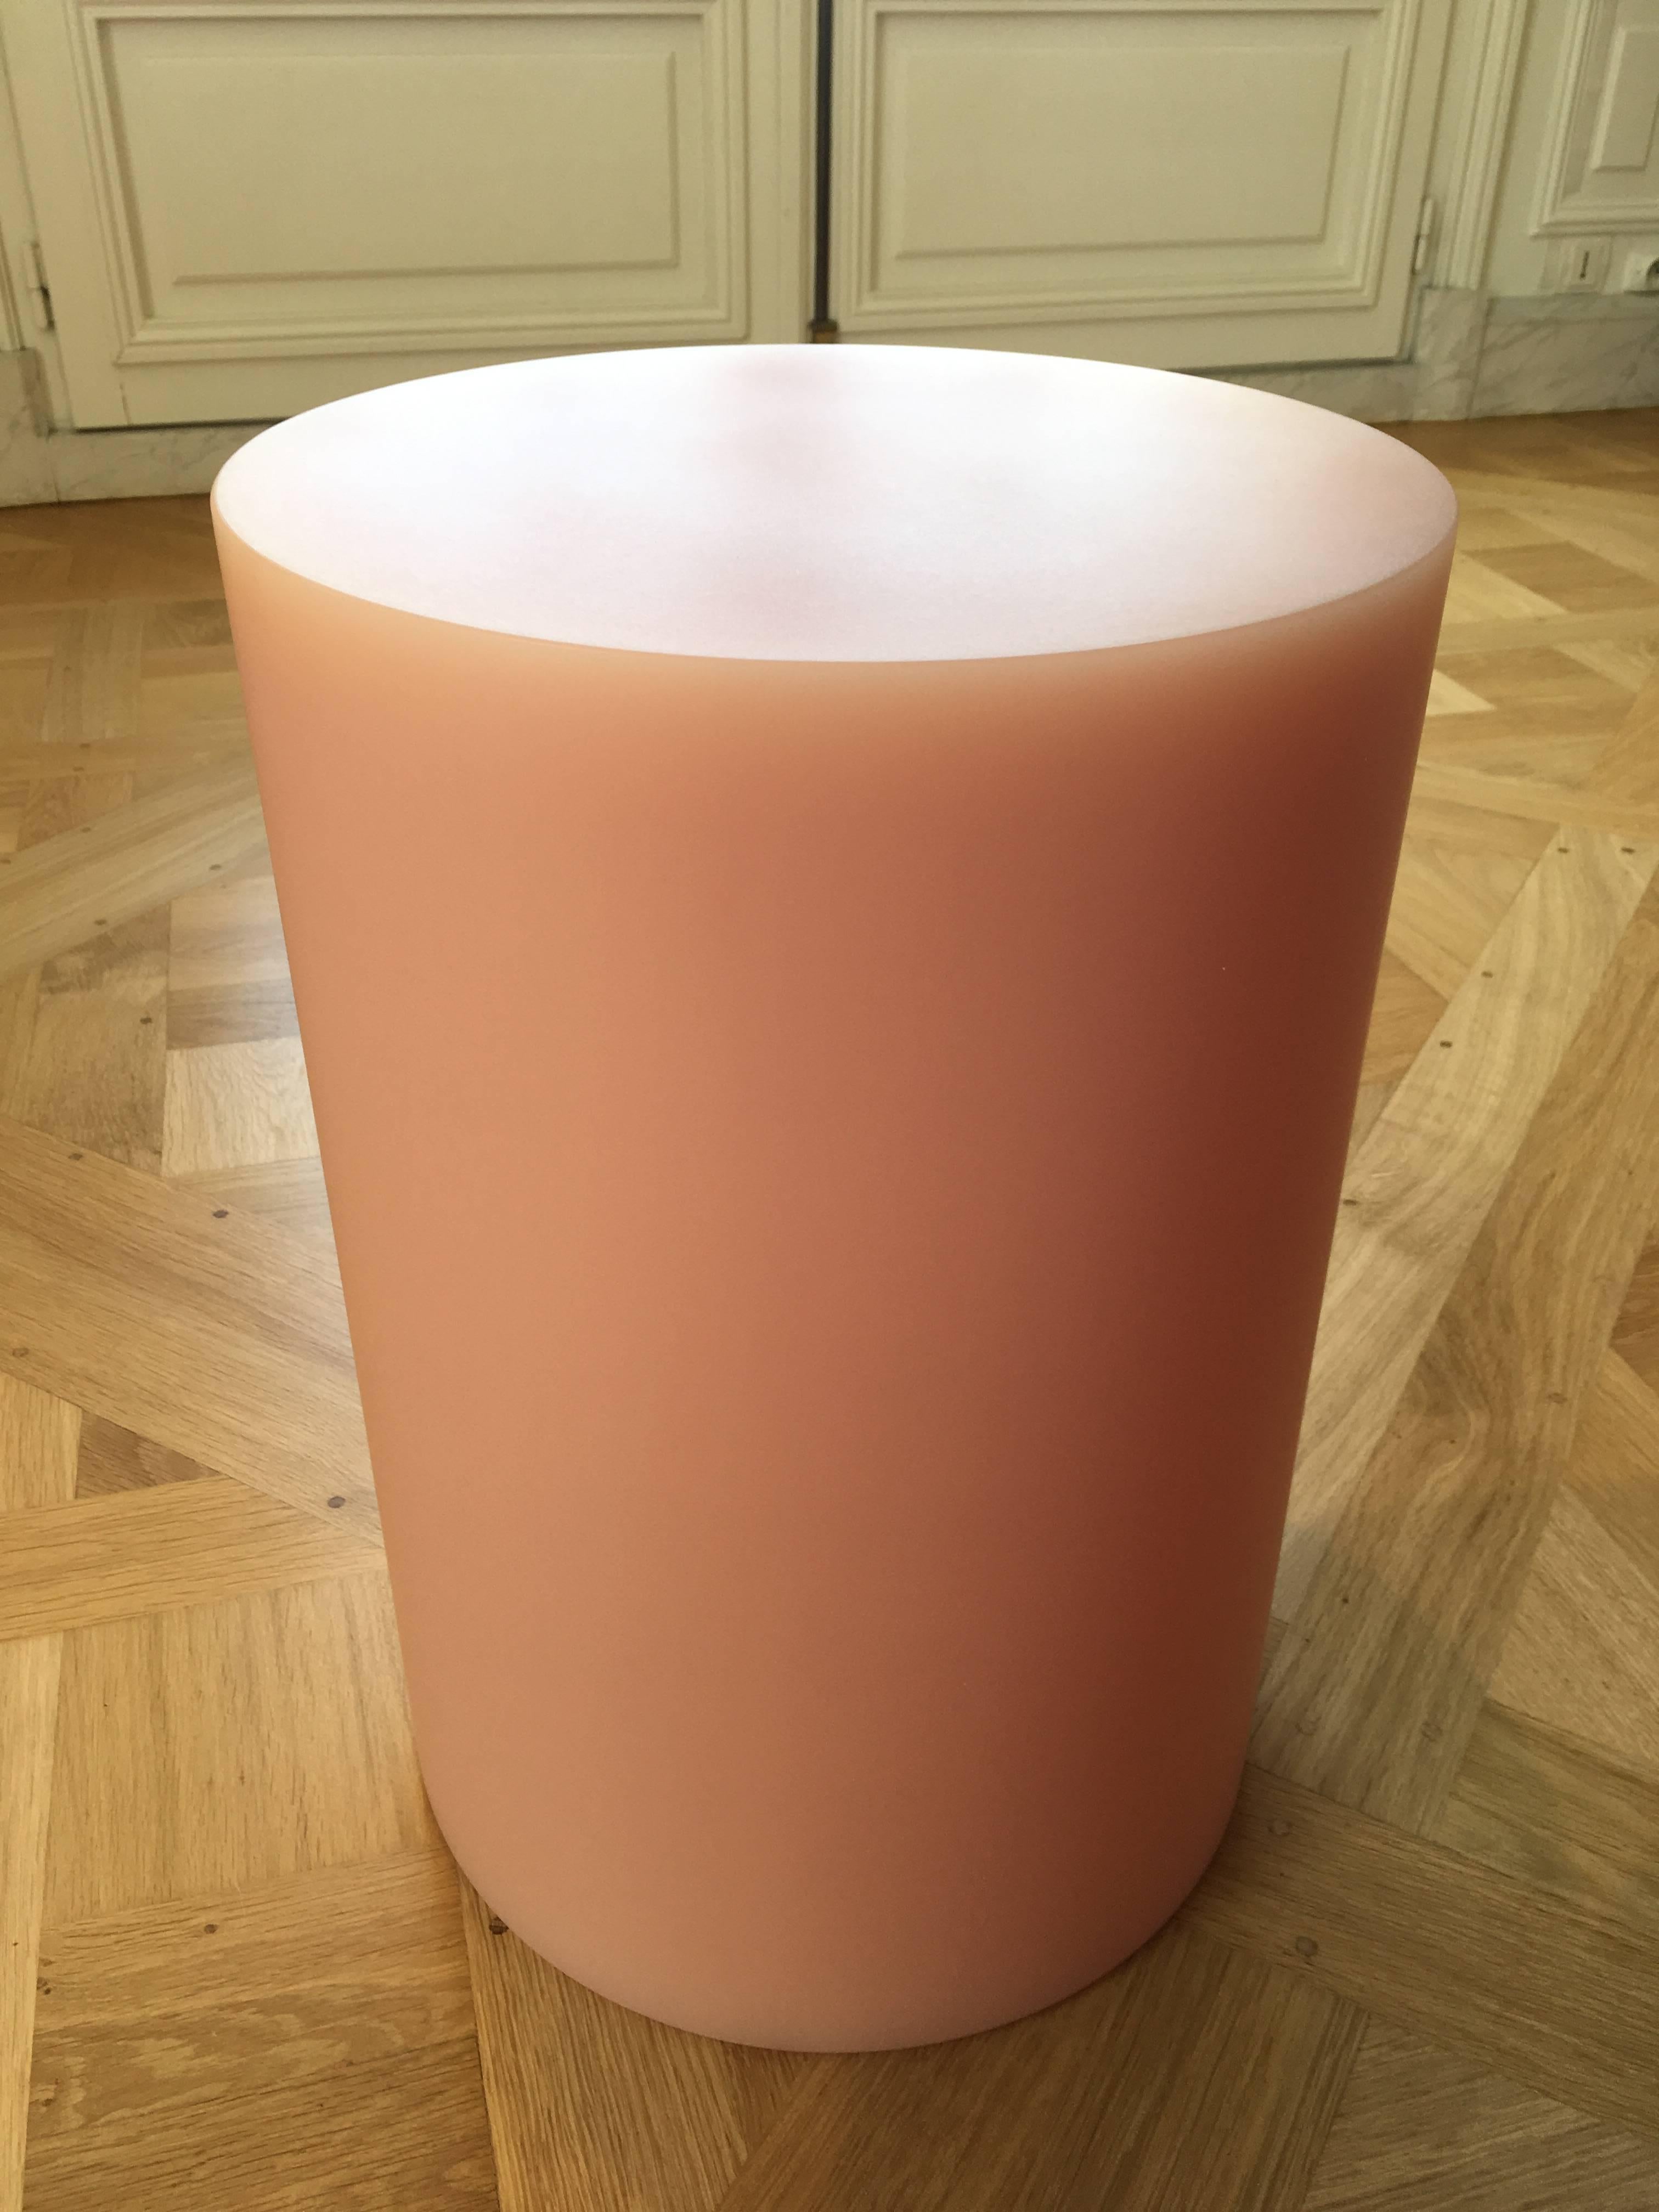 Sabine Marcelis’ new Soap column stools in matte resin are unveiled at Nomad Monaco 2018, creating a pastel and sculptural mise-en-scéne along with the new round Soap table.